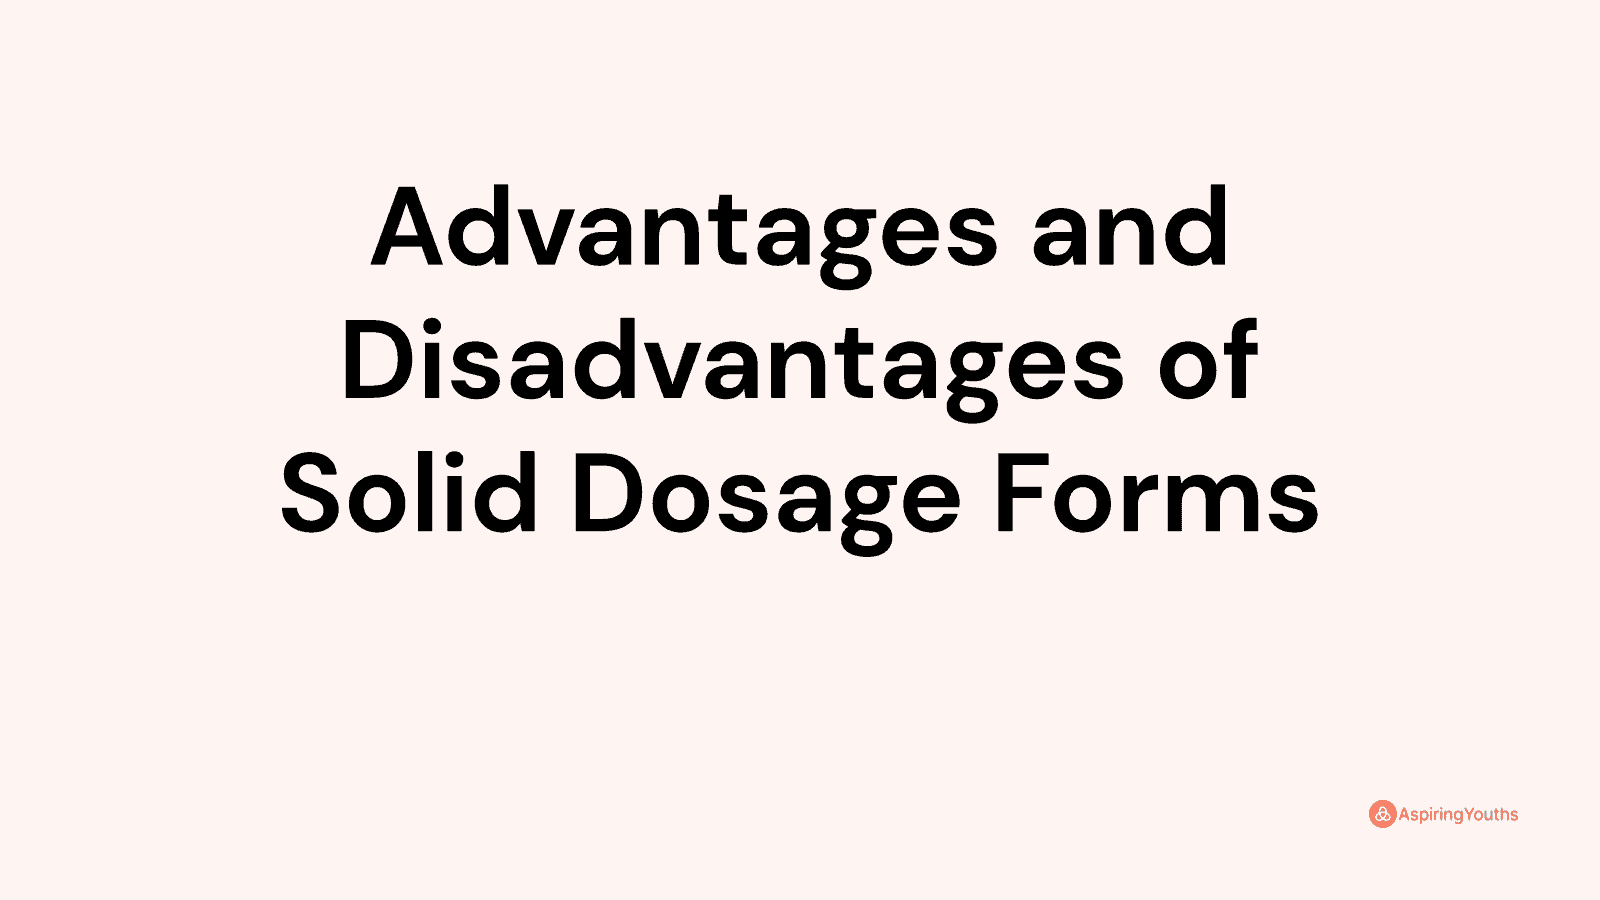 Advantages and disadvantages of Solid Dosage Forms